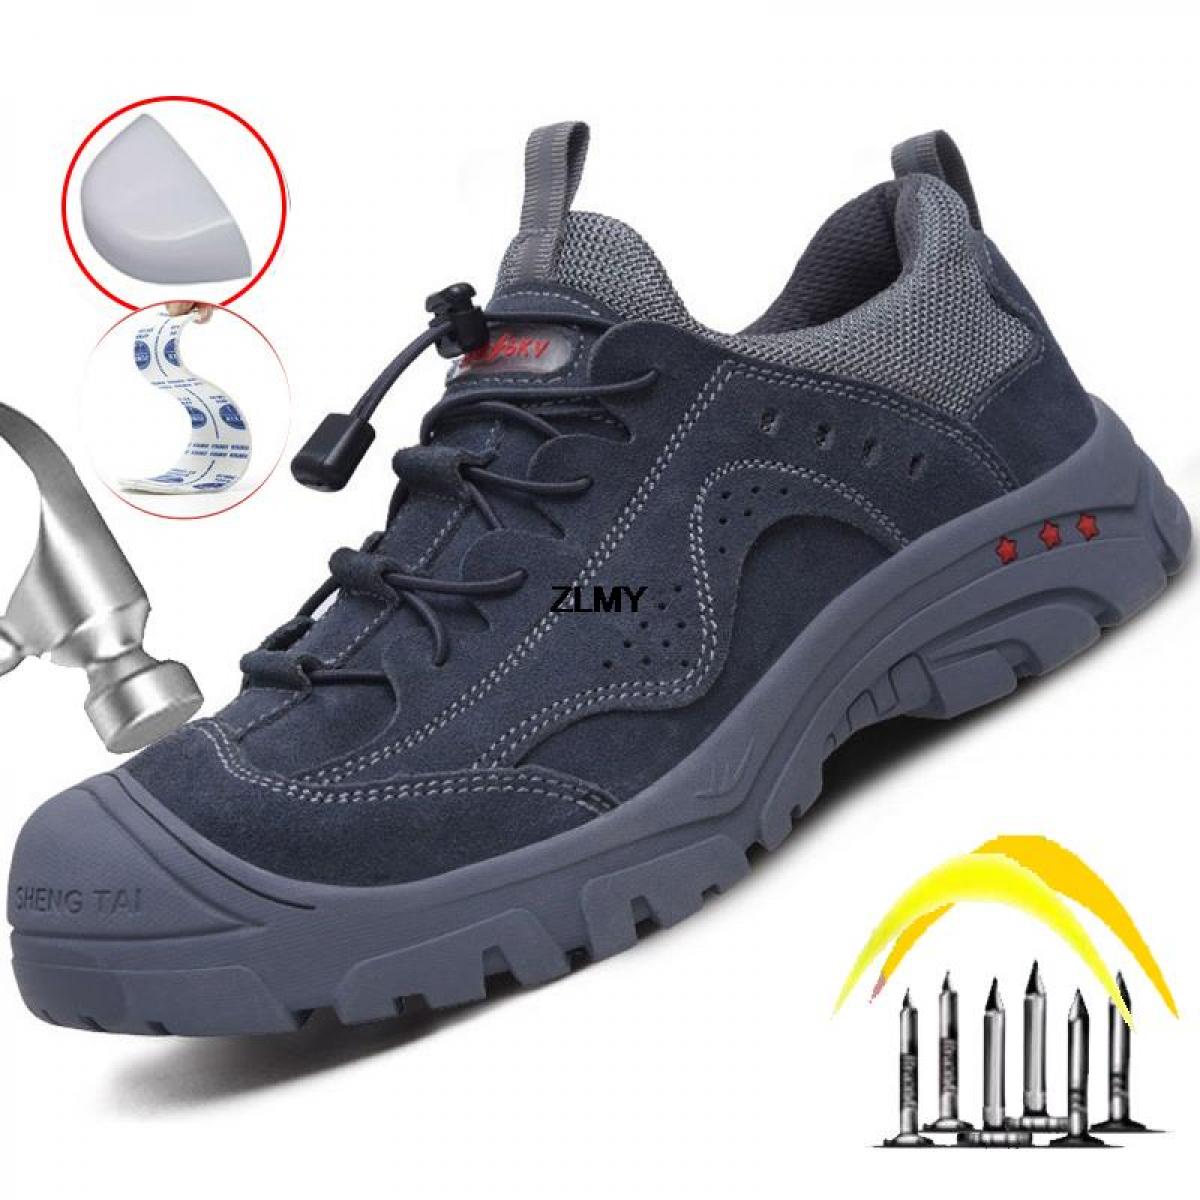 Anti Slip Safety Shoes Men Plastic Toe Work Safety Boots Puncture Proof Welder Shoes Rubber Insulated 6kv Work Boots Man